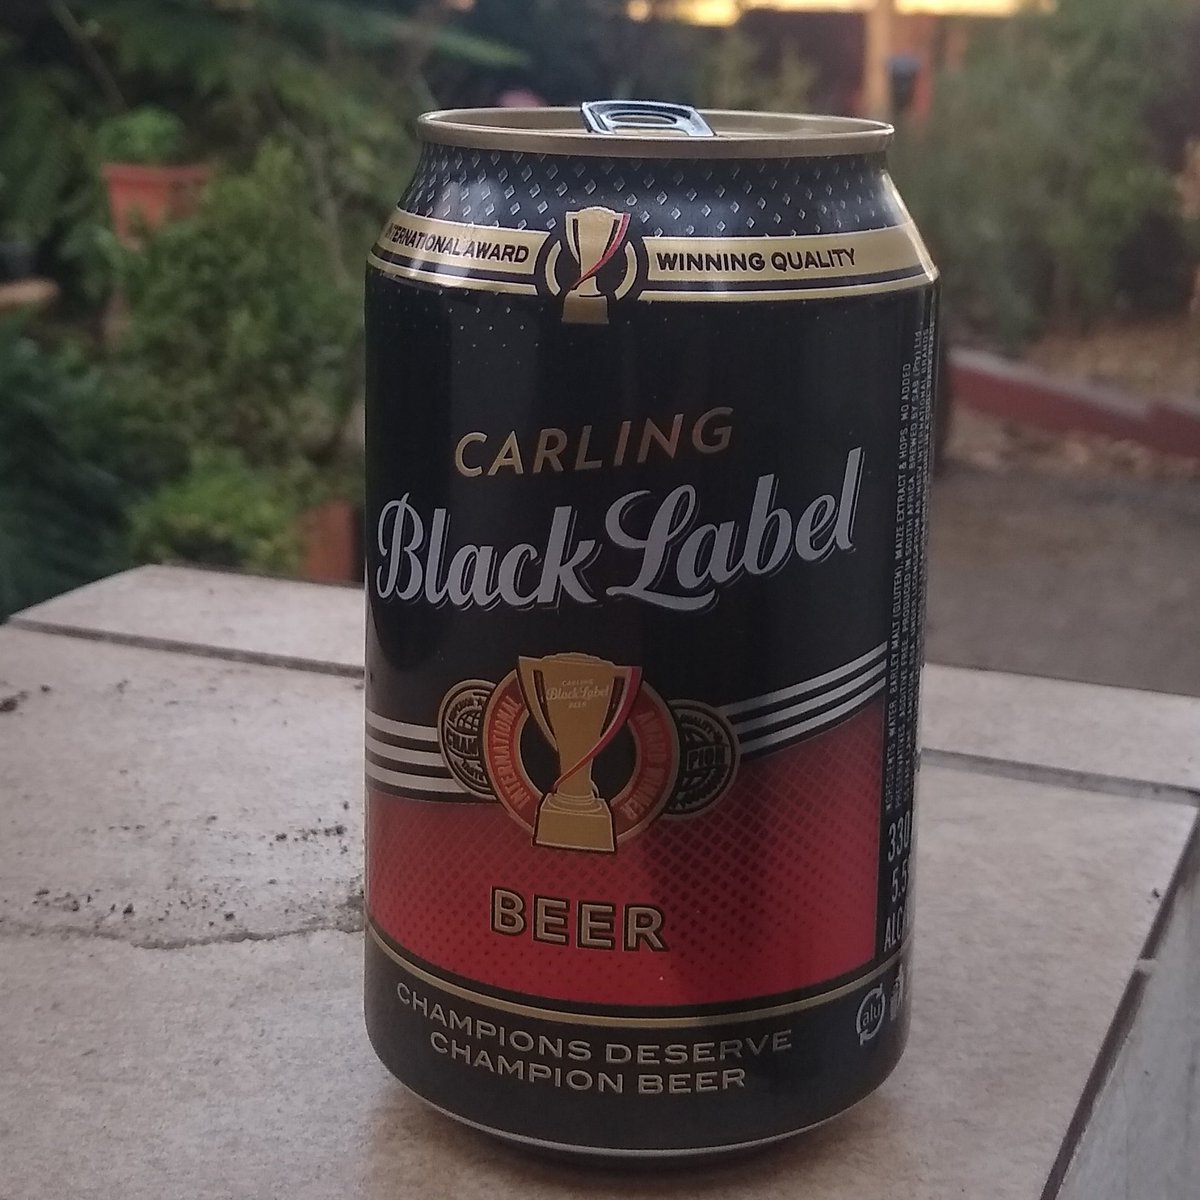 Since it's  #CanadaDay, I'm drinking Carling Black Label, South Africa's most popular beer and a beer that originated in Canada. So how did a relatively obscure Canadian beer become South Africa's bestseller? It's a story about soccer, advertising and international trade...